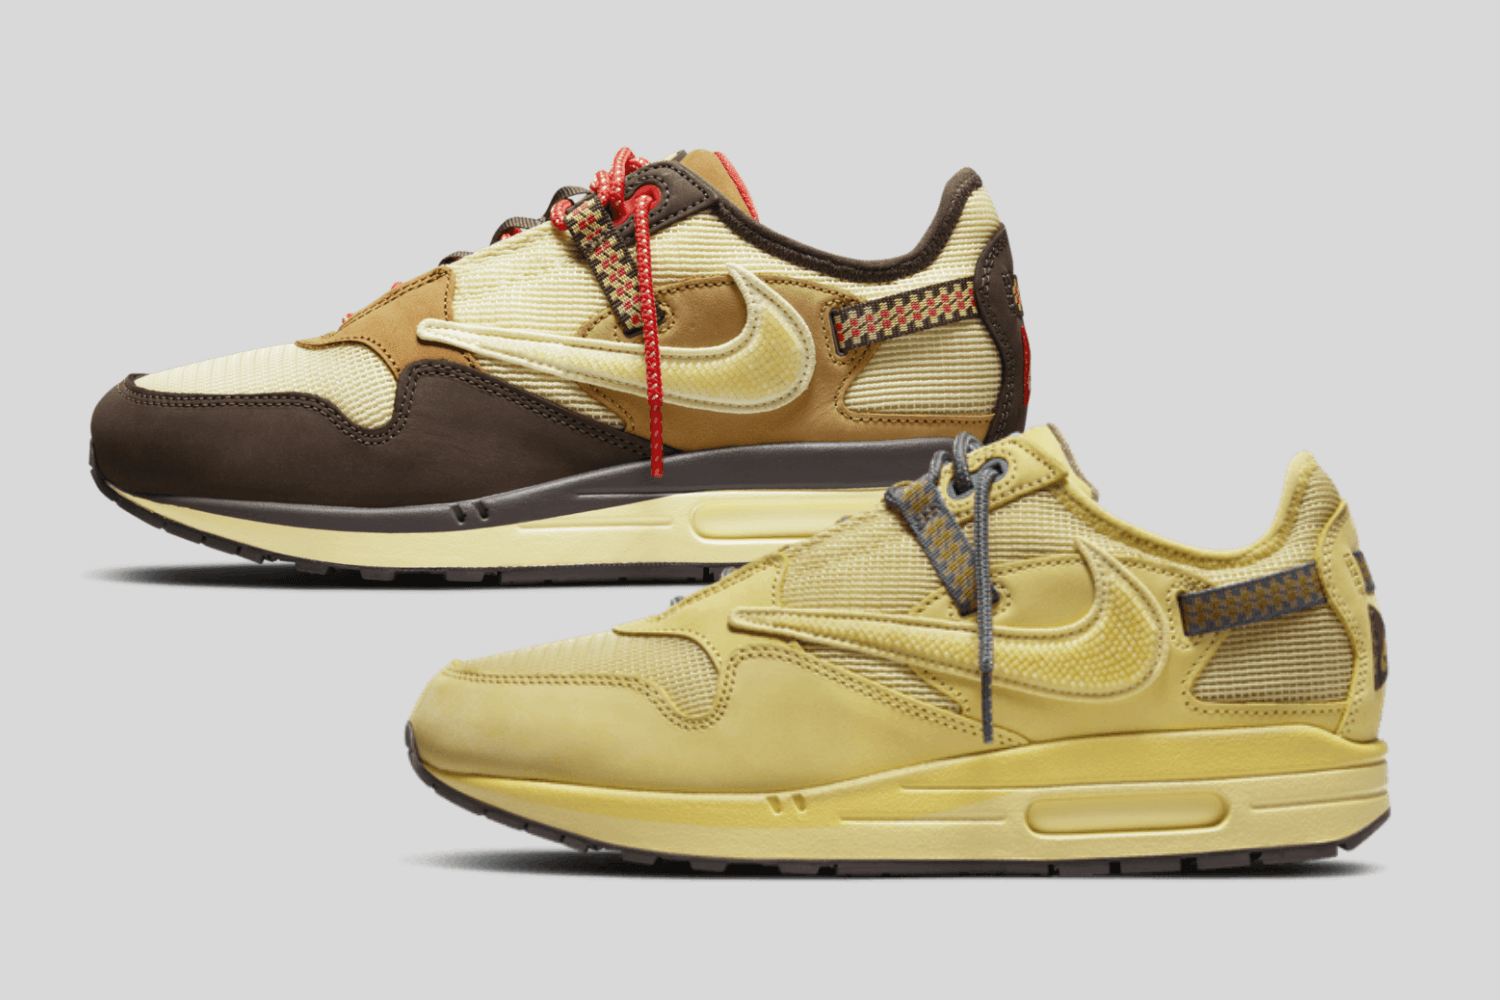 The Travis Scott x Nike Air Max 1 is likely to be released May 2022